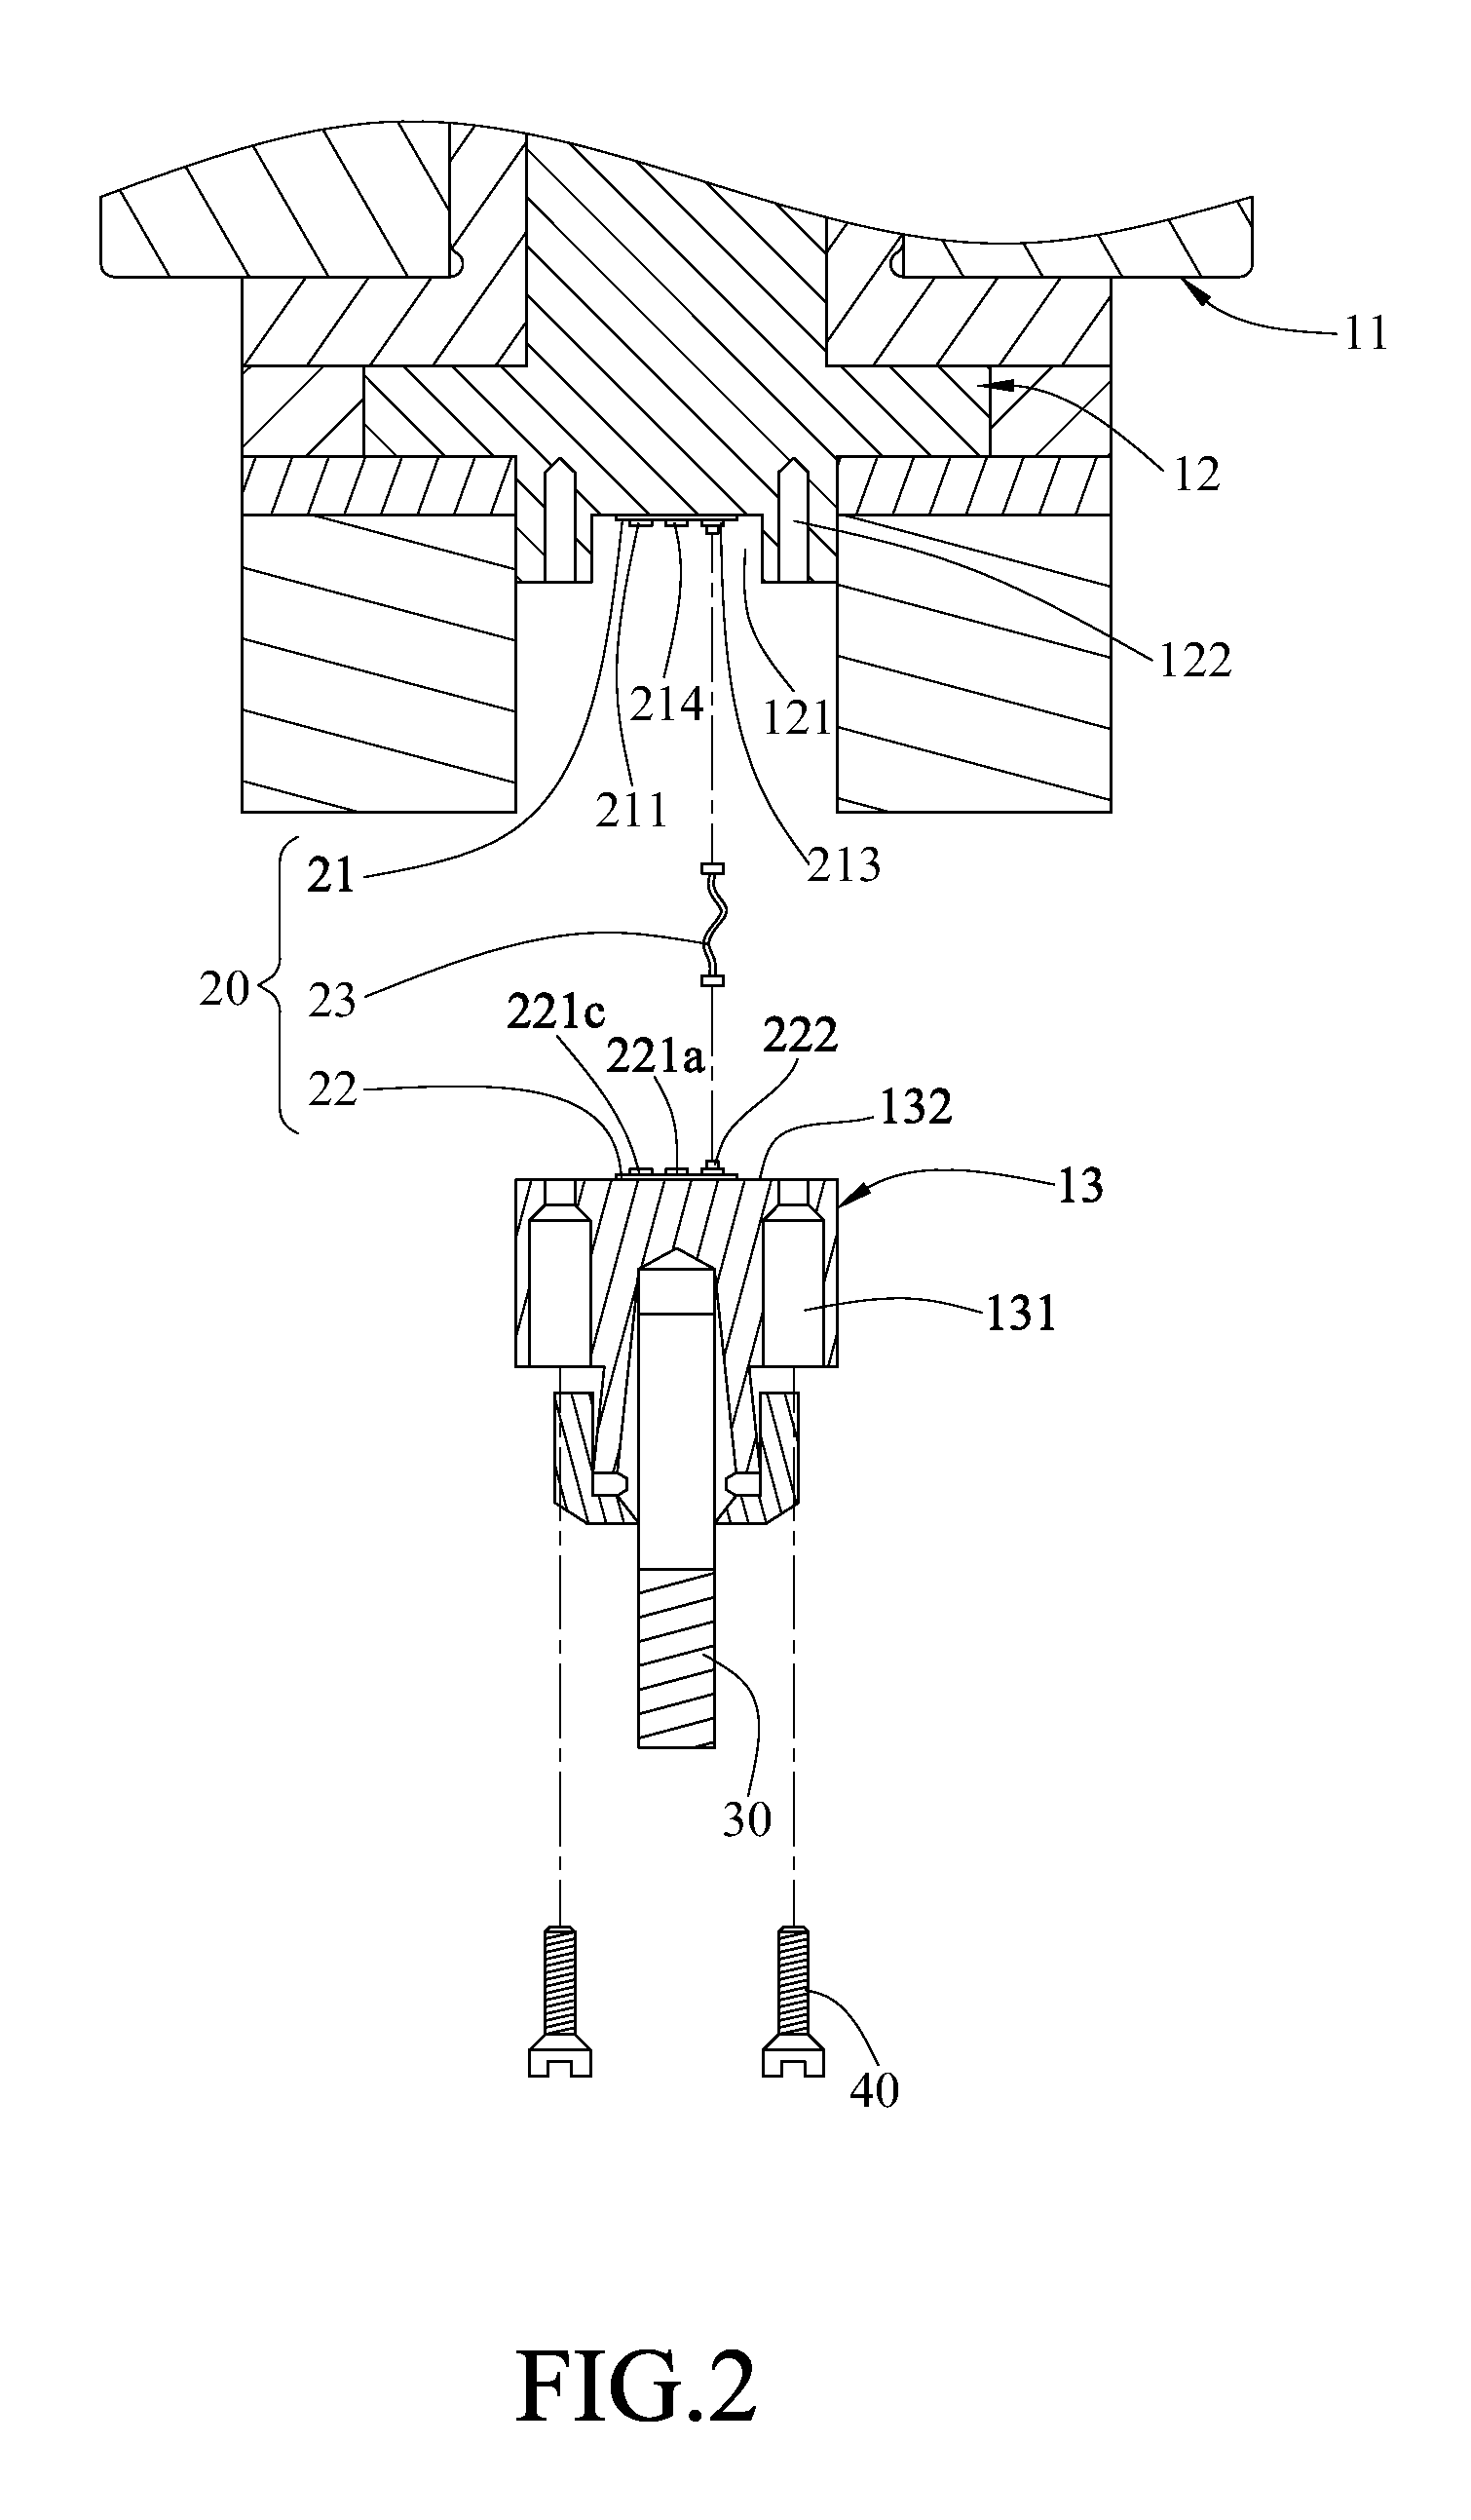 Machine tool spindle structure capable of monitoring working state in real time